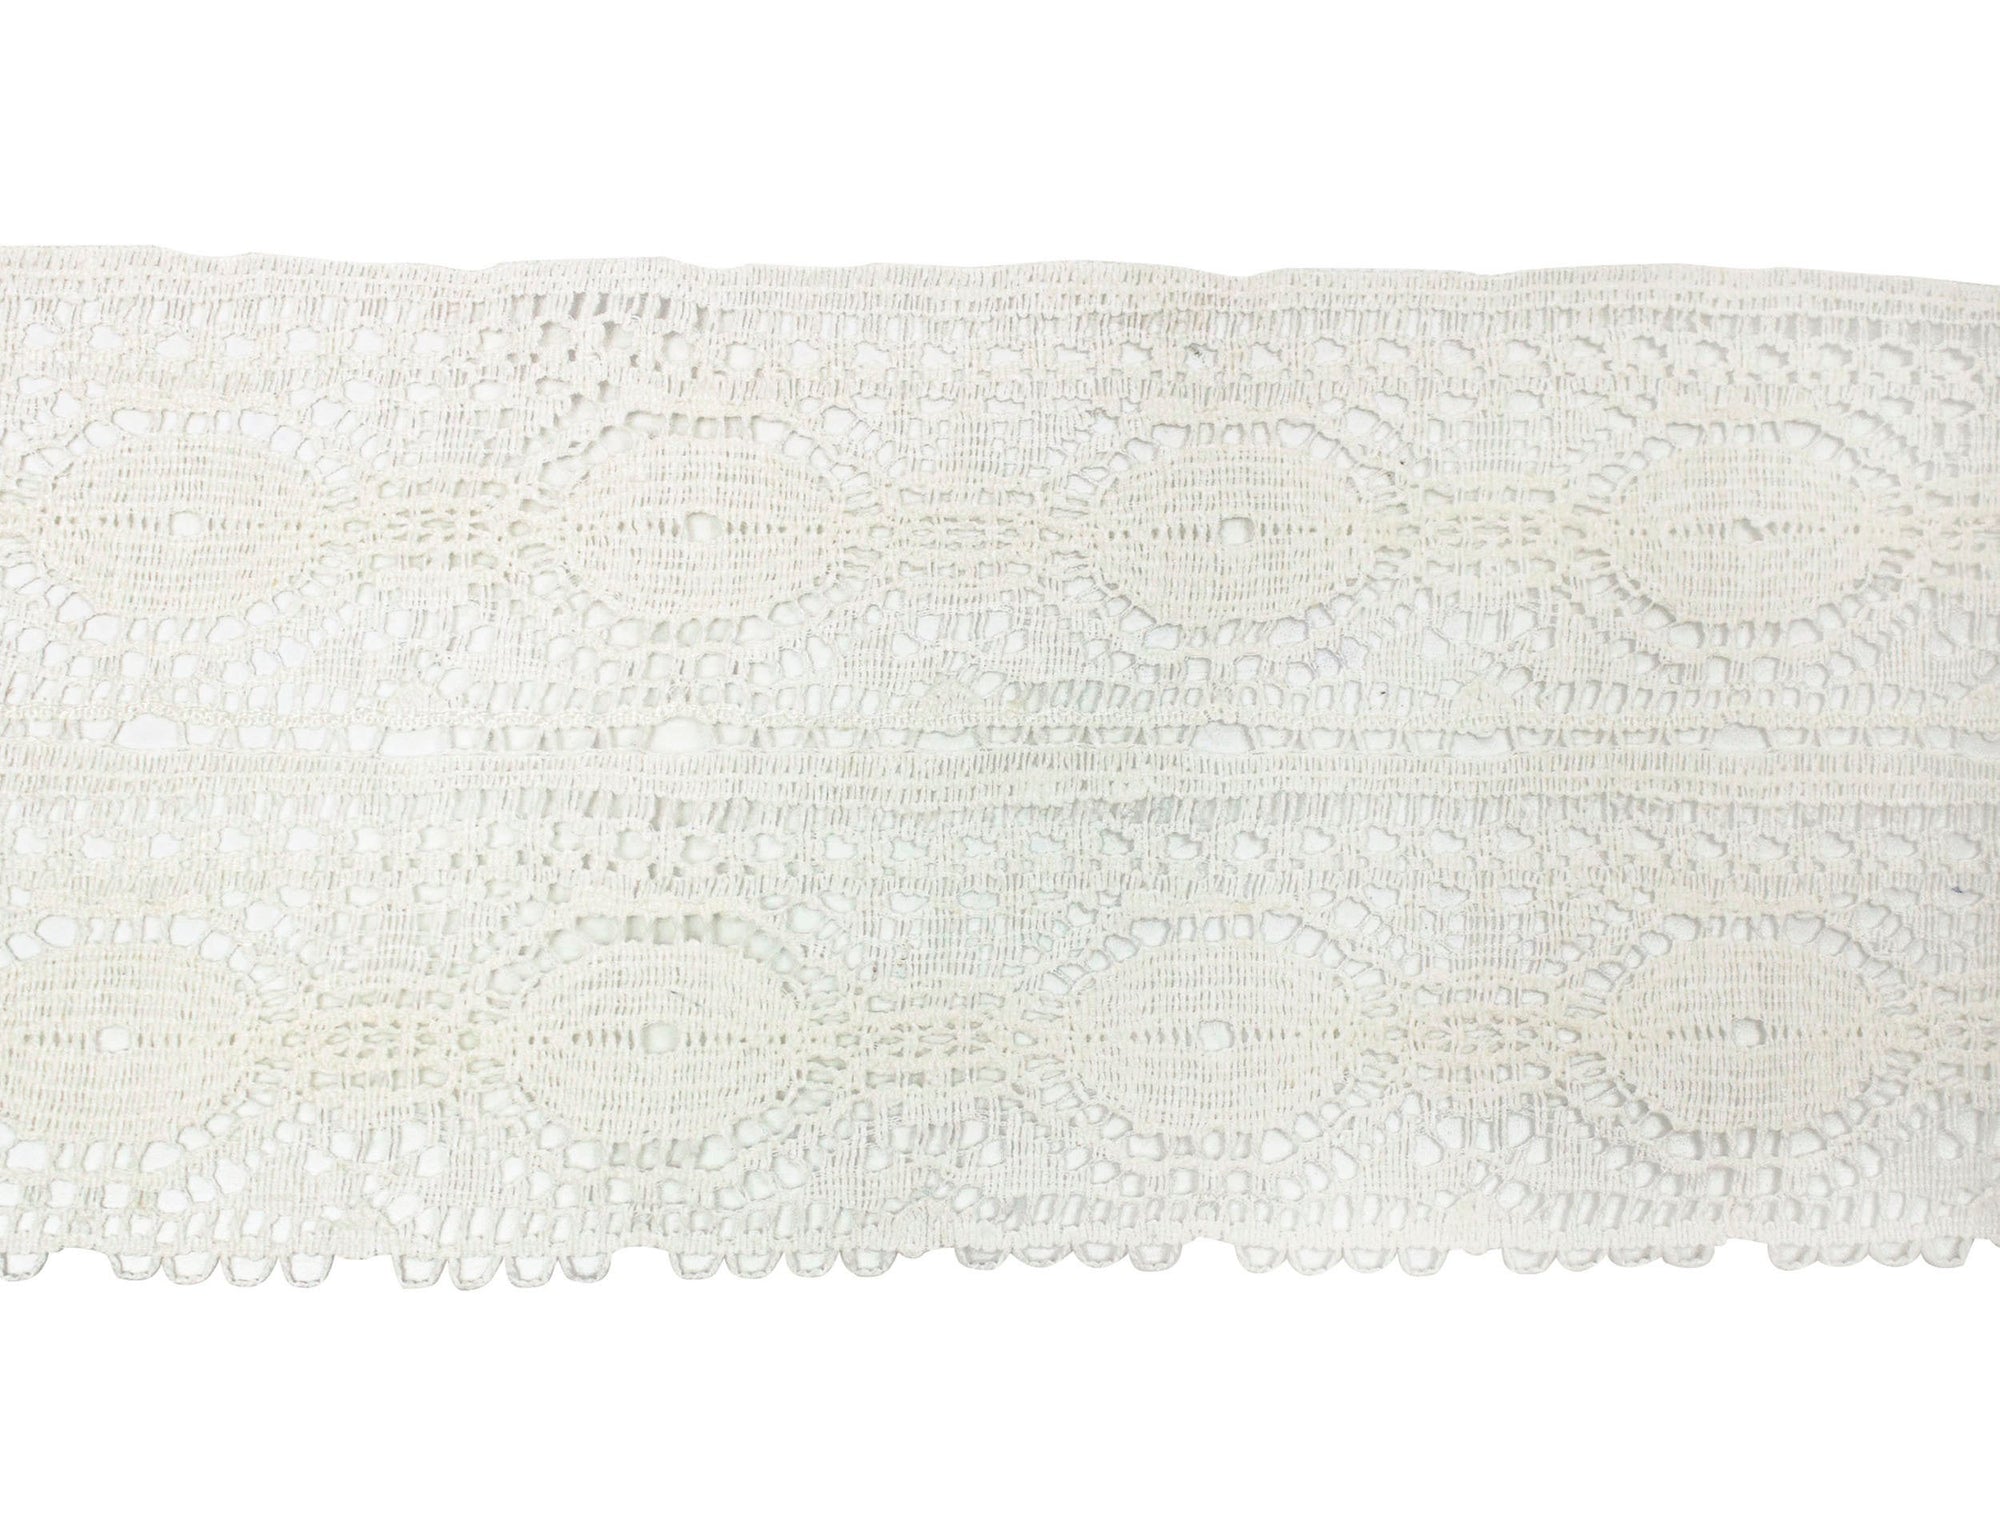 Vintage Lace Trim Ivory Lace Double Wide Pattern 4" - Sold by the Yard - Humboldt Haberdashery